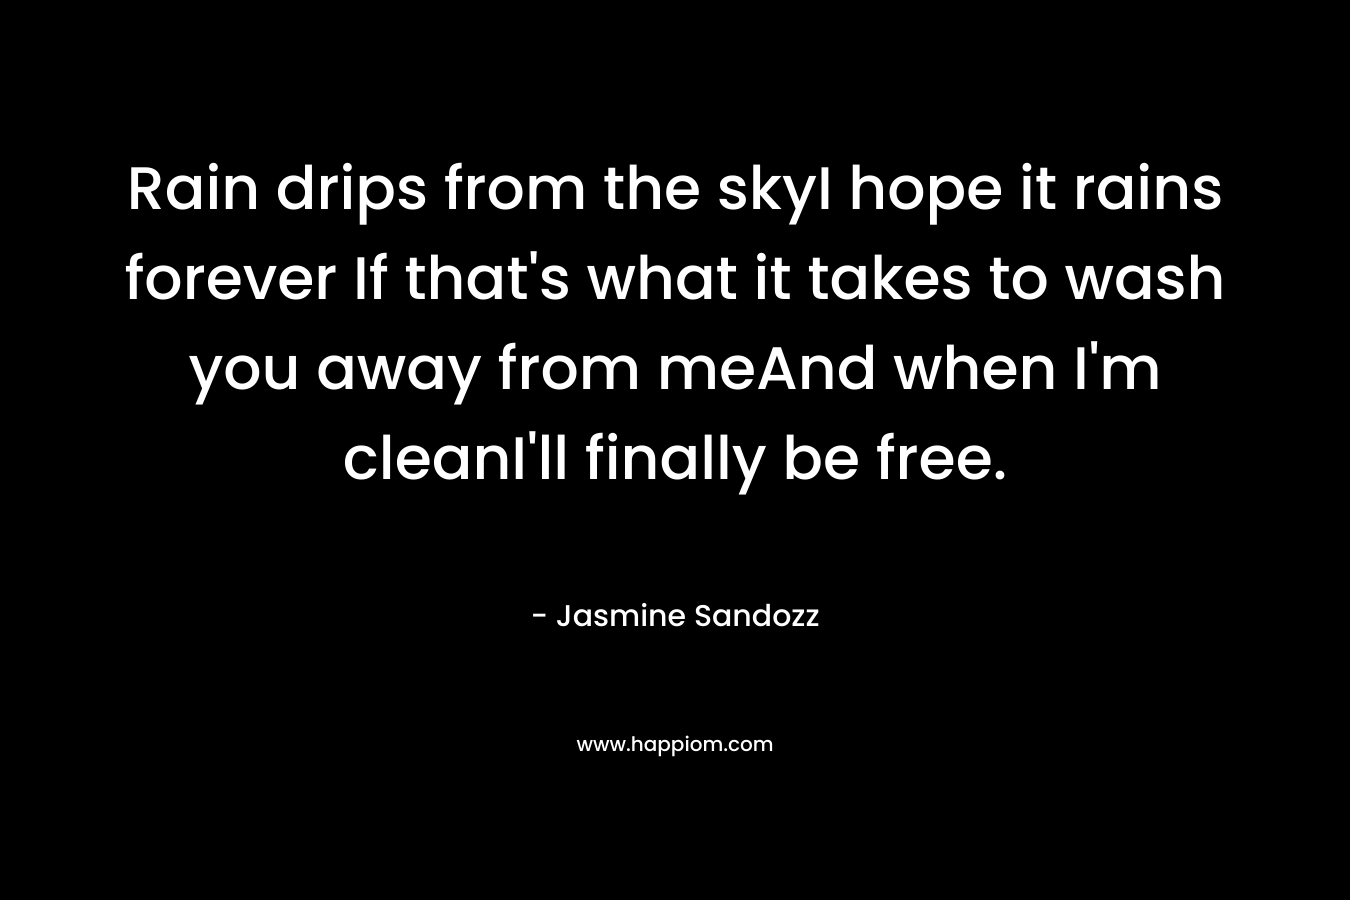 Rain drips from the skyI hope it rains forever If that’s what it takes to wash you away from meAnd when I’m cleanI’ll finally be free. – Jasmine Sandozz